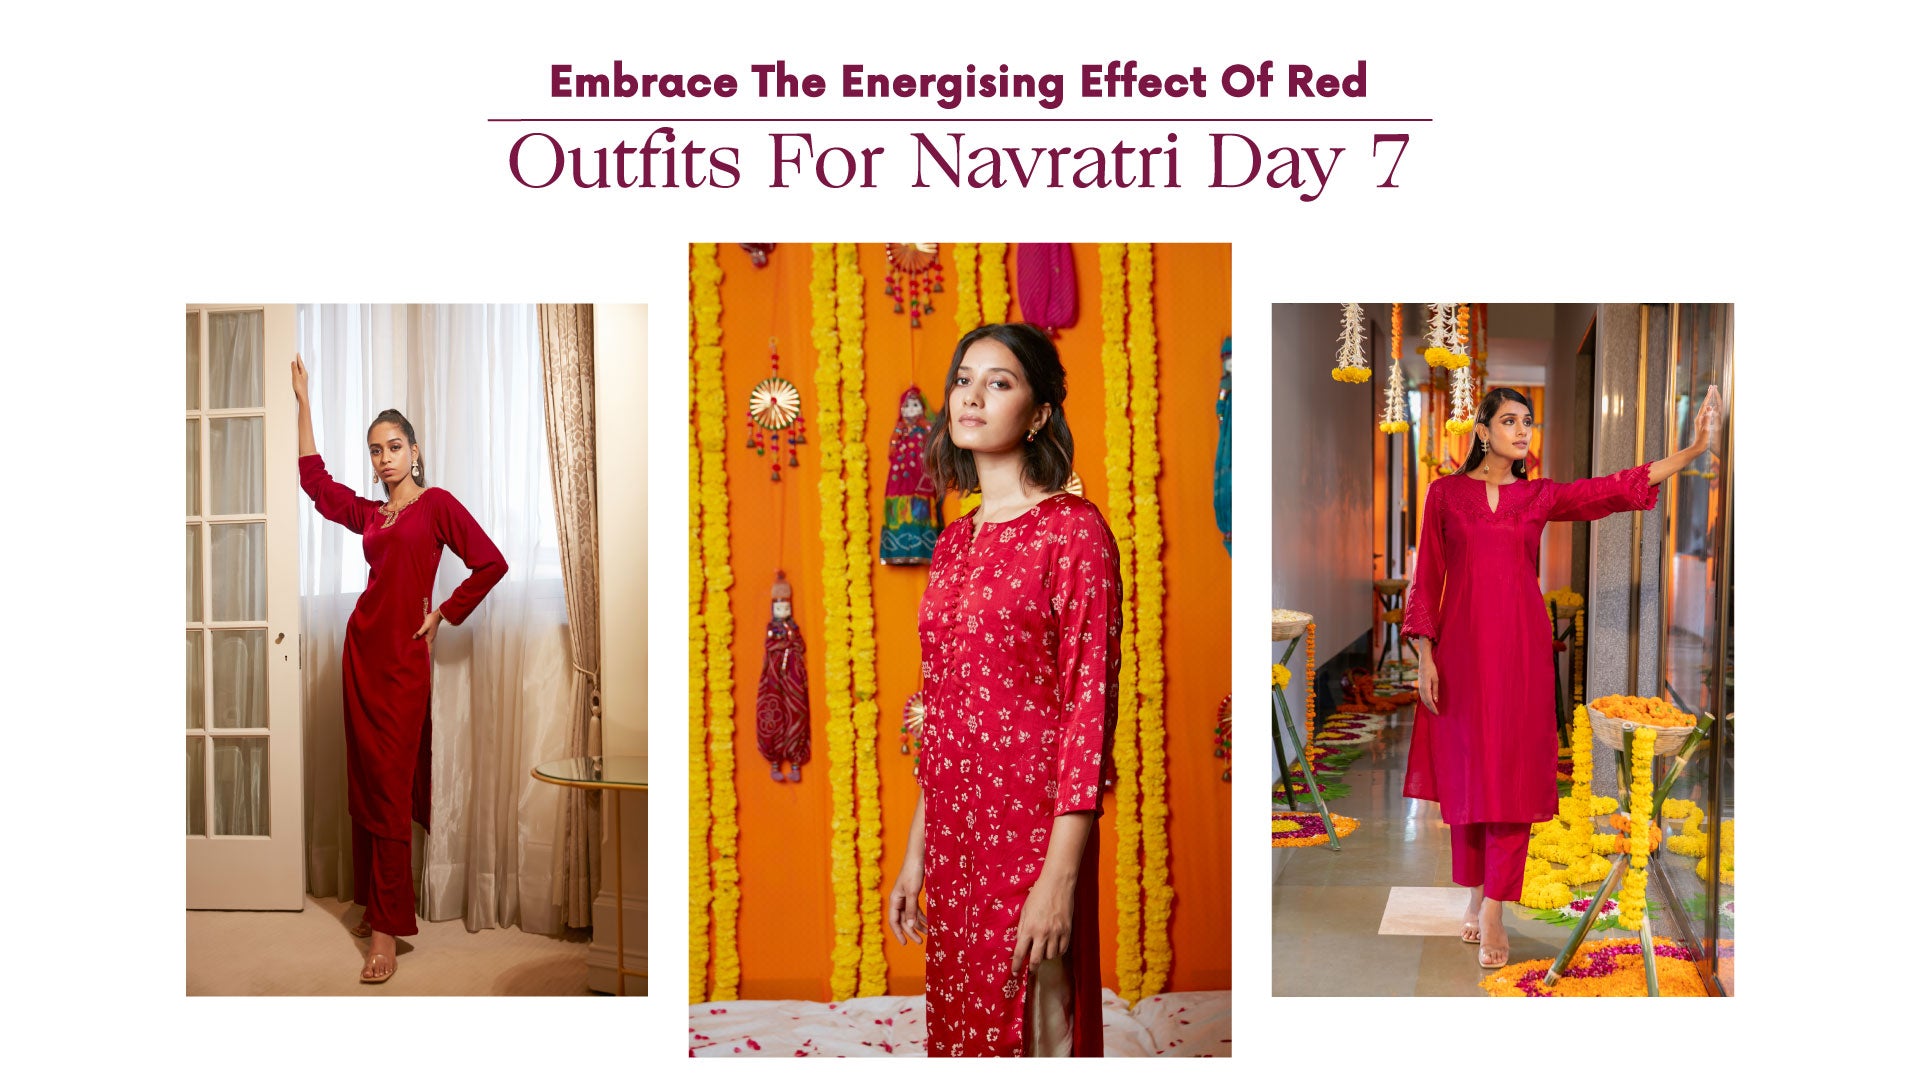 Embrace The Energising Effect Of Red Outfits On Navratri Day 7